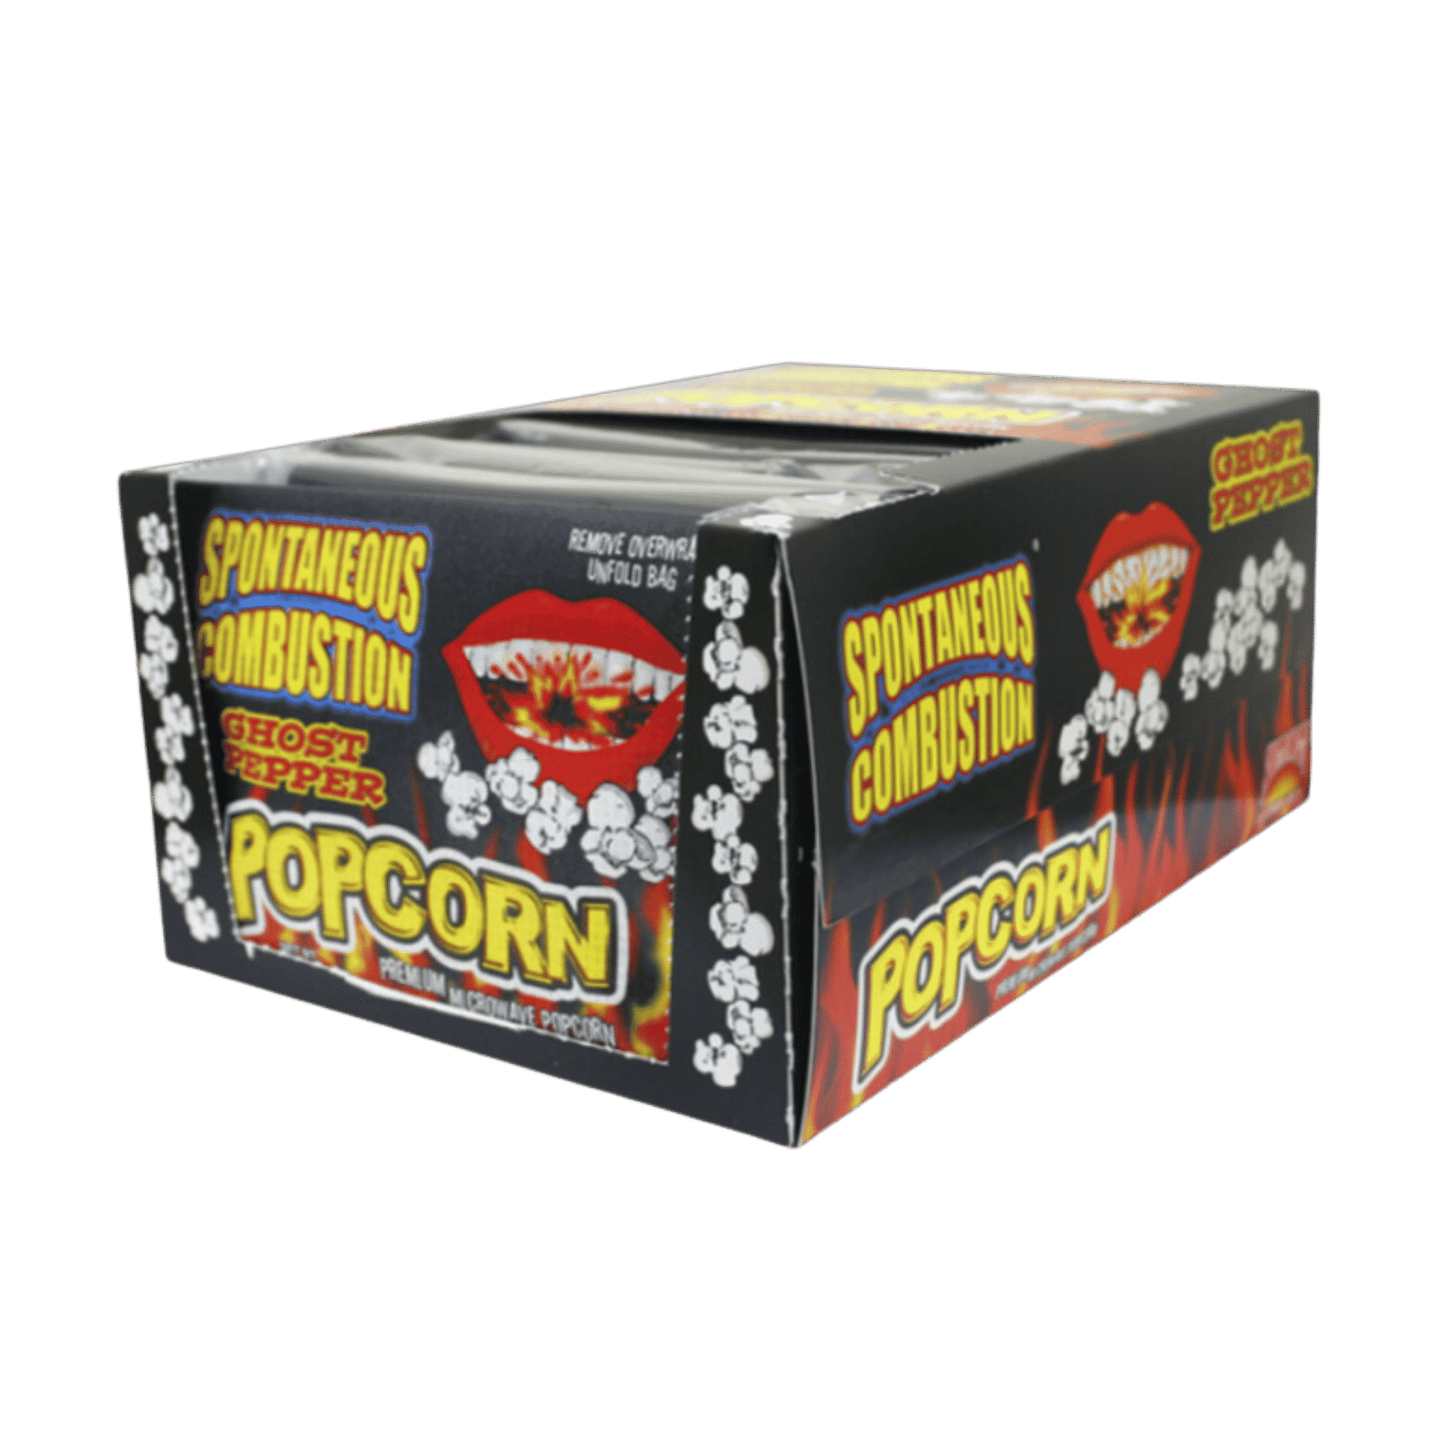 Ass Kickin' - Popcorn micro-ondes - Spontaneous Combustion Ghost pepper (12)